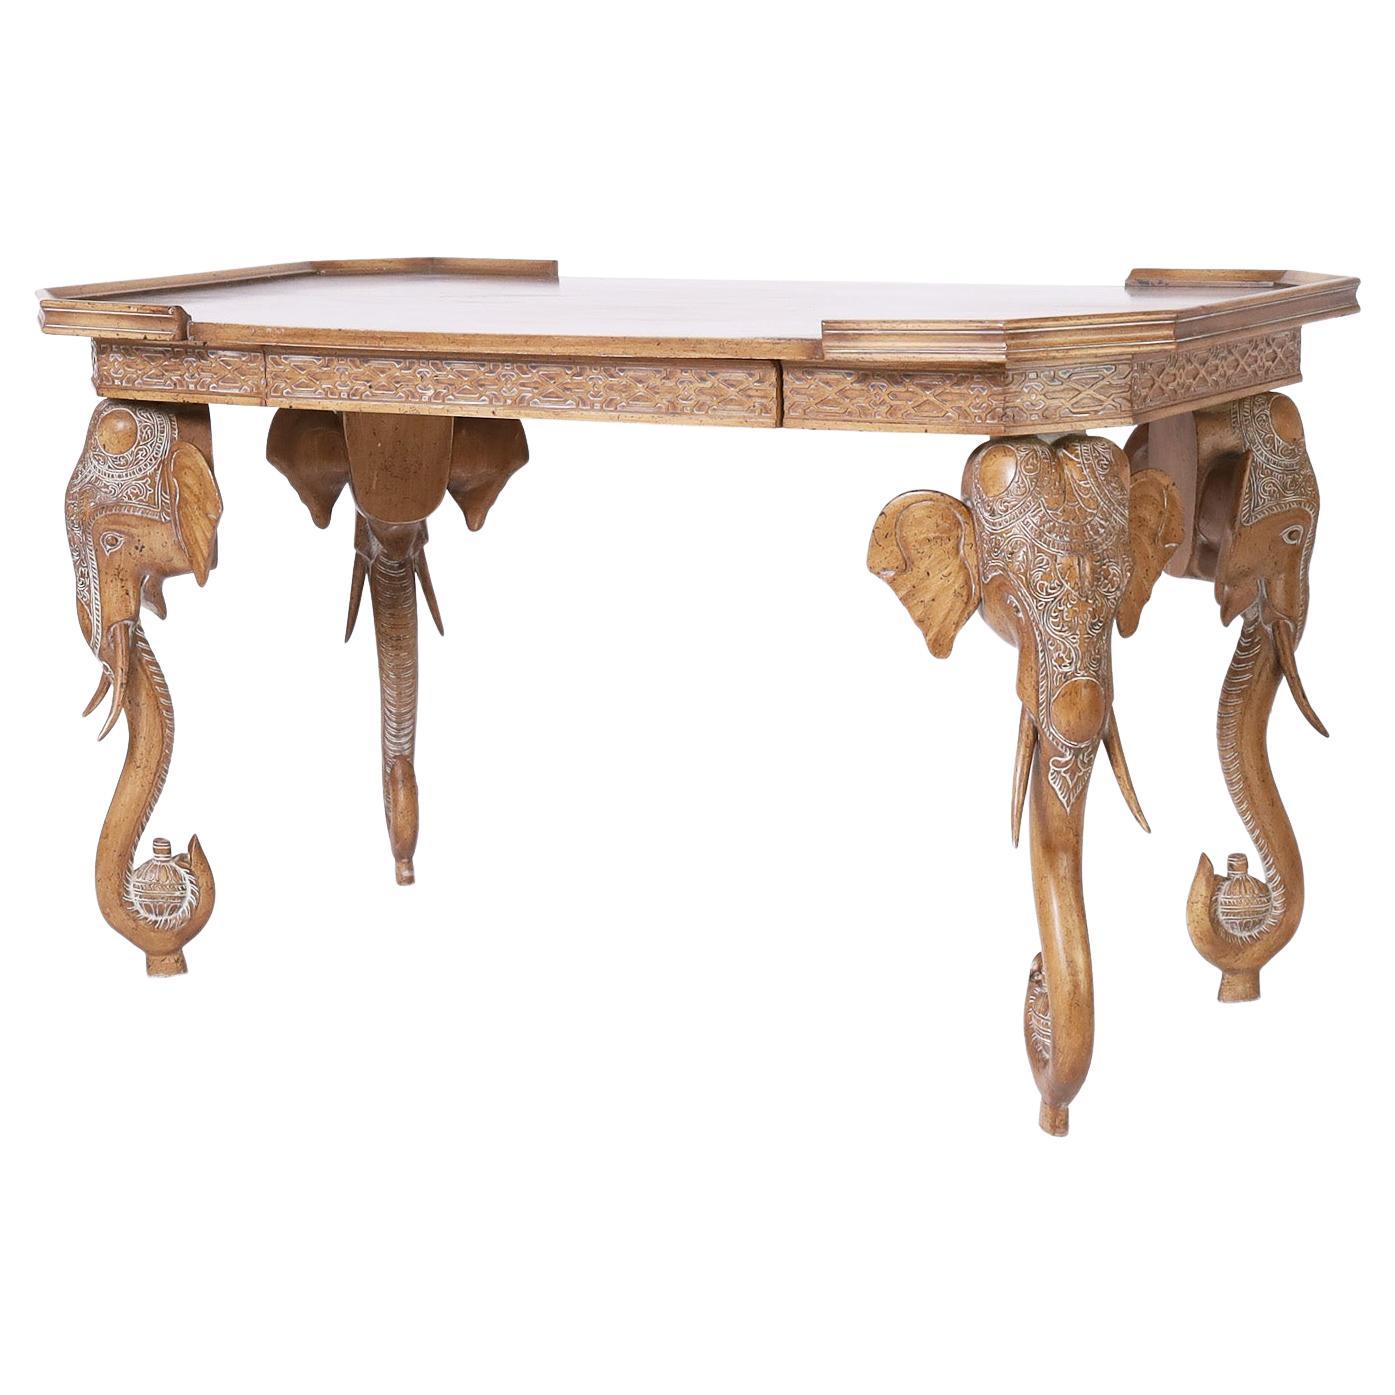 British Colonial Elephant Head Writing Desk For Sale